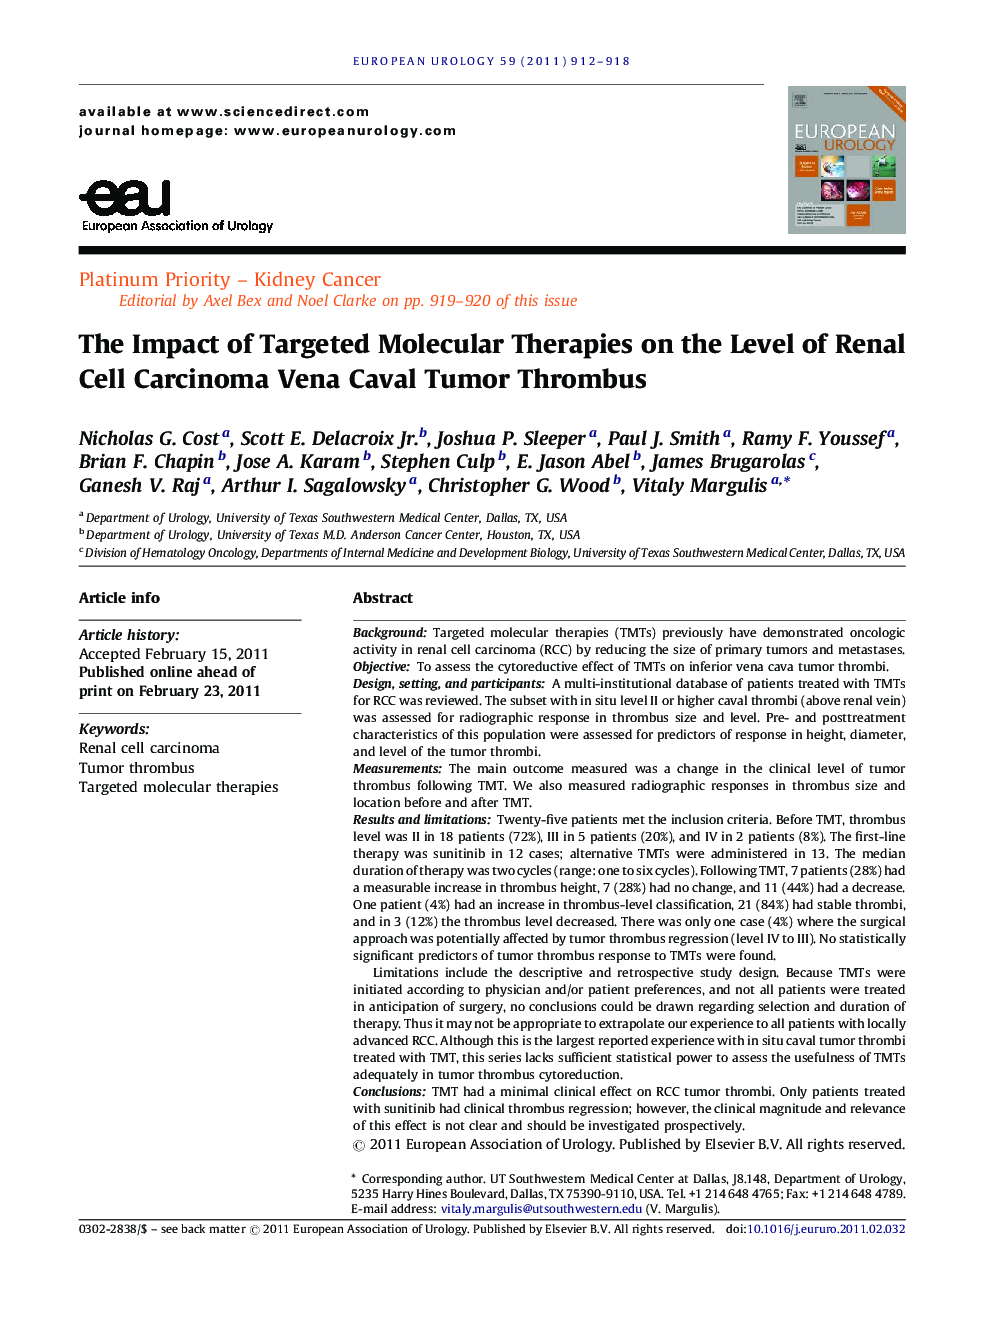 The Impact of Targeted Molecular Therapies on the Level of Renal Cell Carcinoma Vena Caval Tumor Thrombus